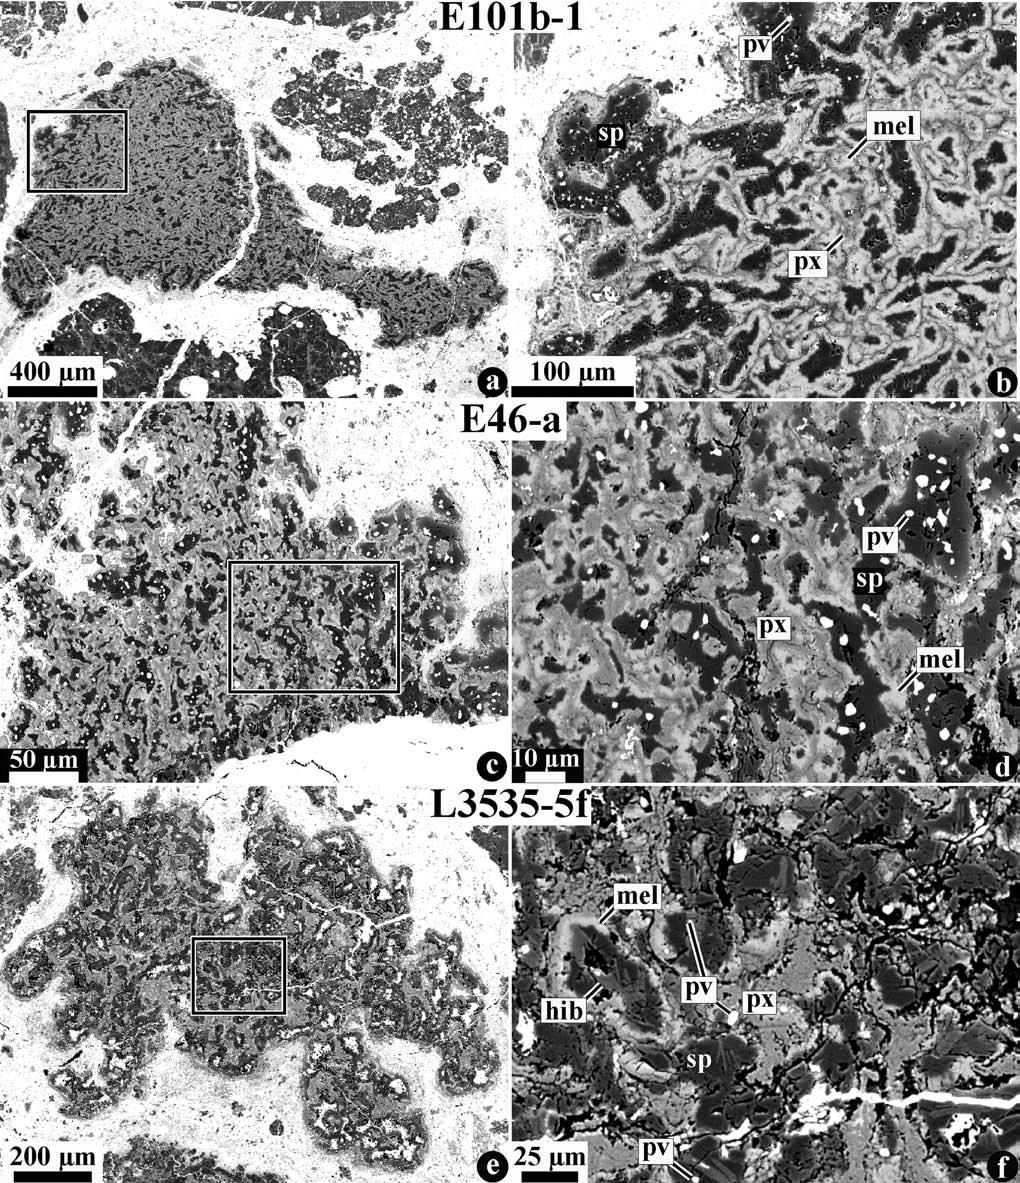 1520 A. N. Krot et al. Fig. 1. BSE images of the mineralogically unzoned, fine-grained, spinel-rich inclusions E101b-1 (a, b) and E46-a (c, d) from Efremovka and L3535-5f (e, f) from Leoville.